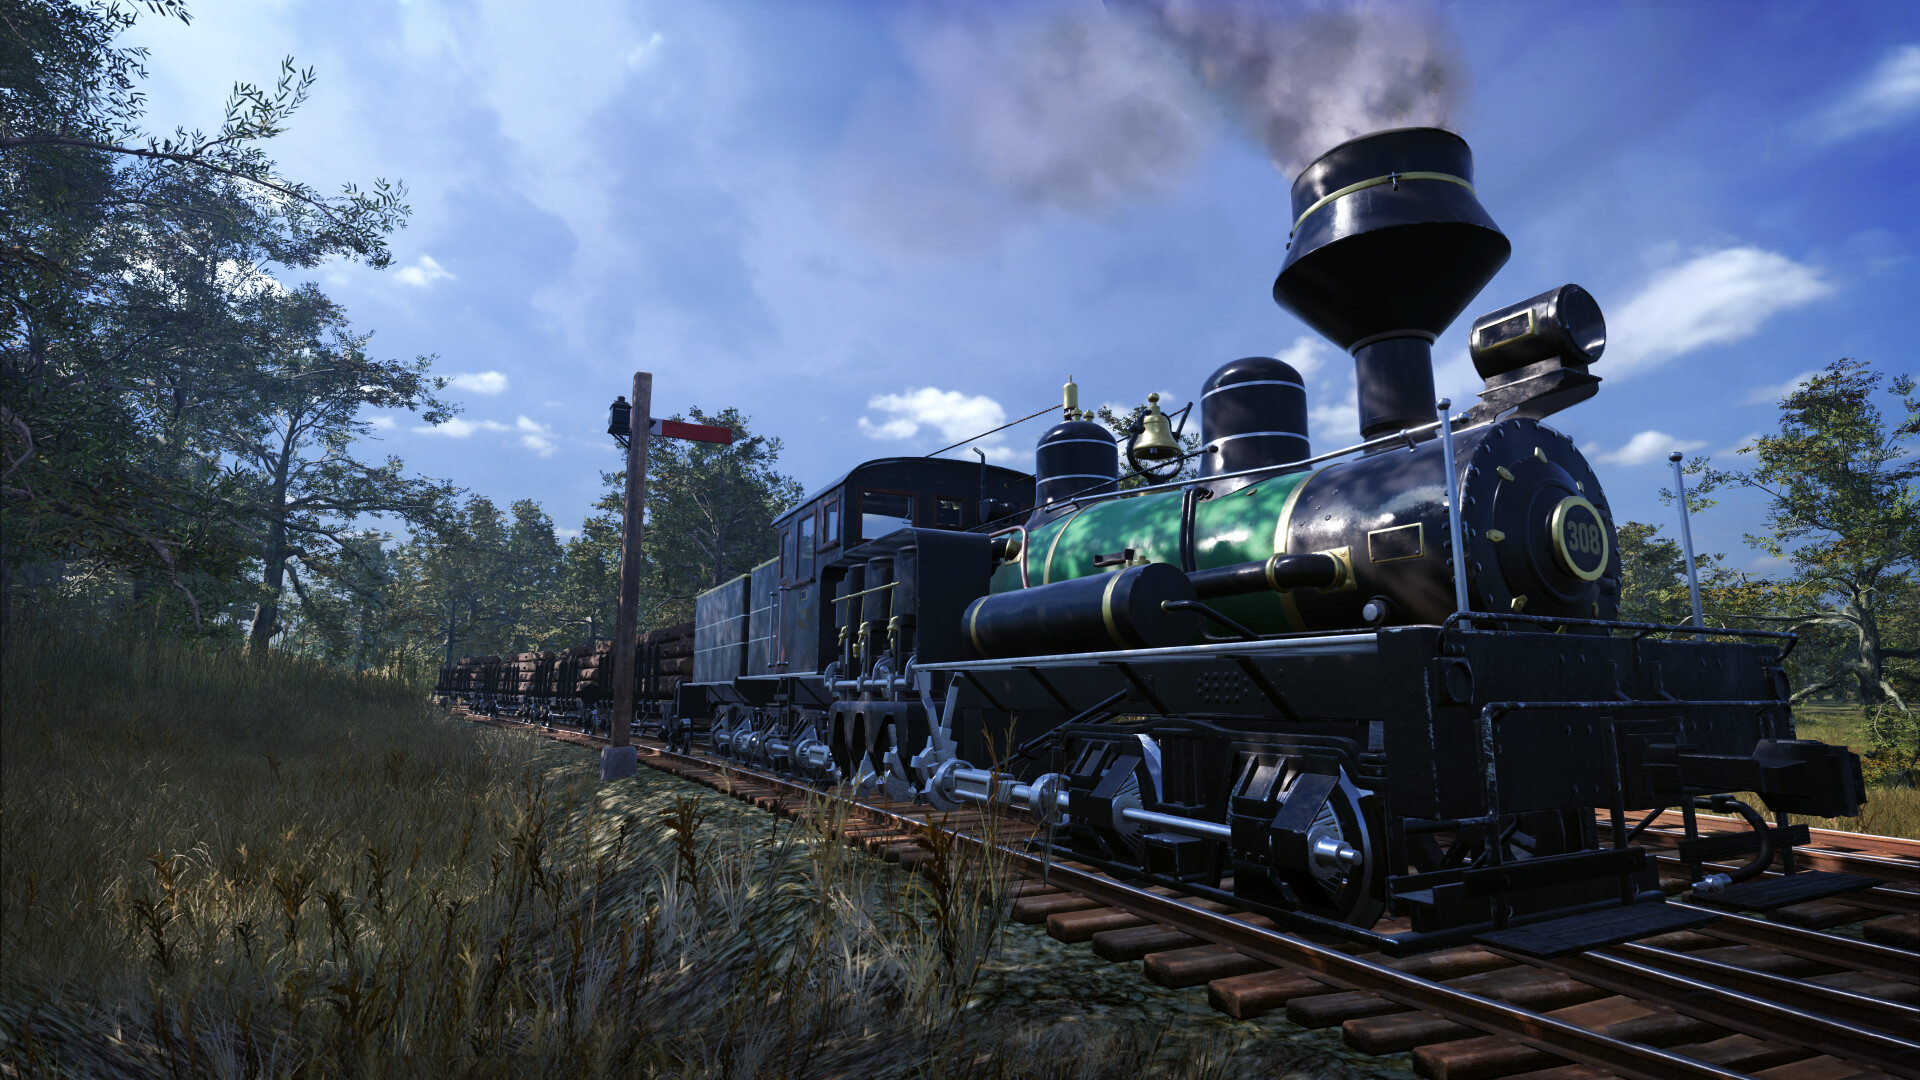 Railway Empire 2 Deluxe Edition (without DE, JP) Steam CD Key